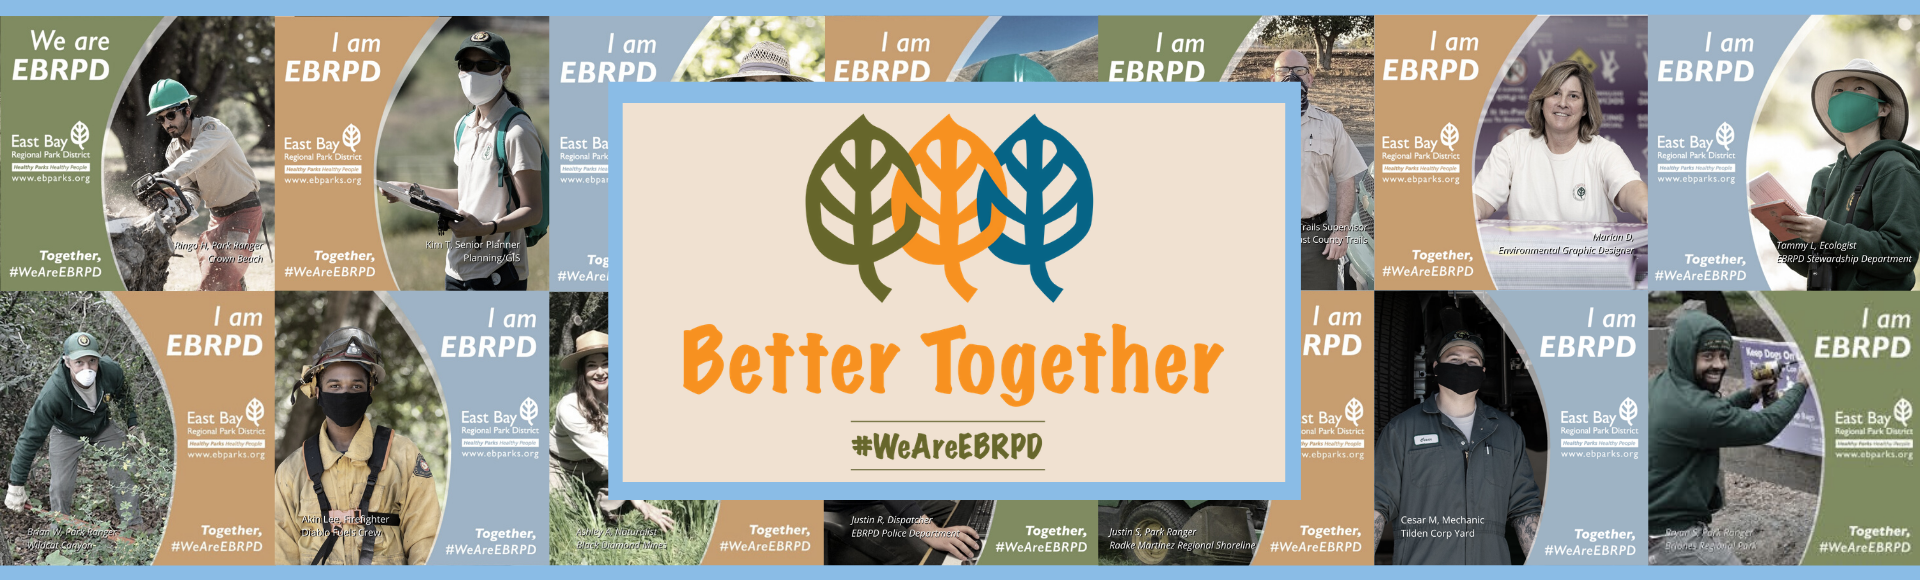 Better Together #WeAreEBRD